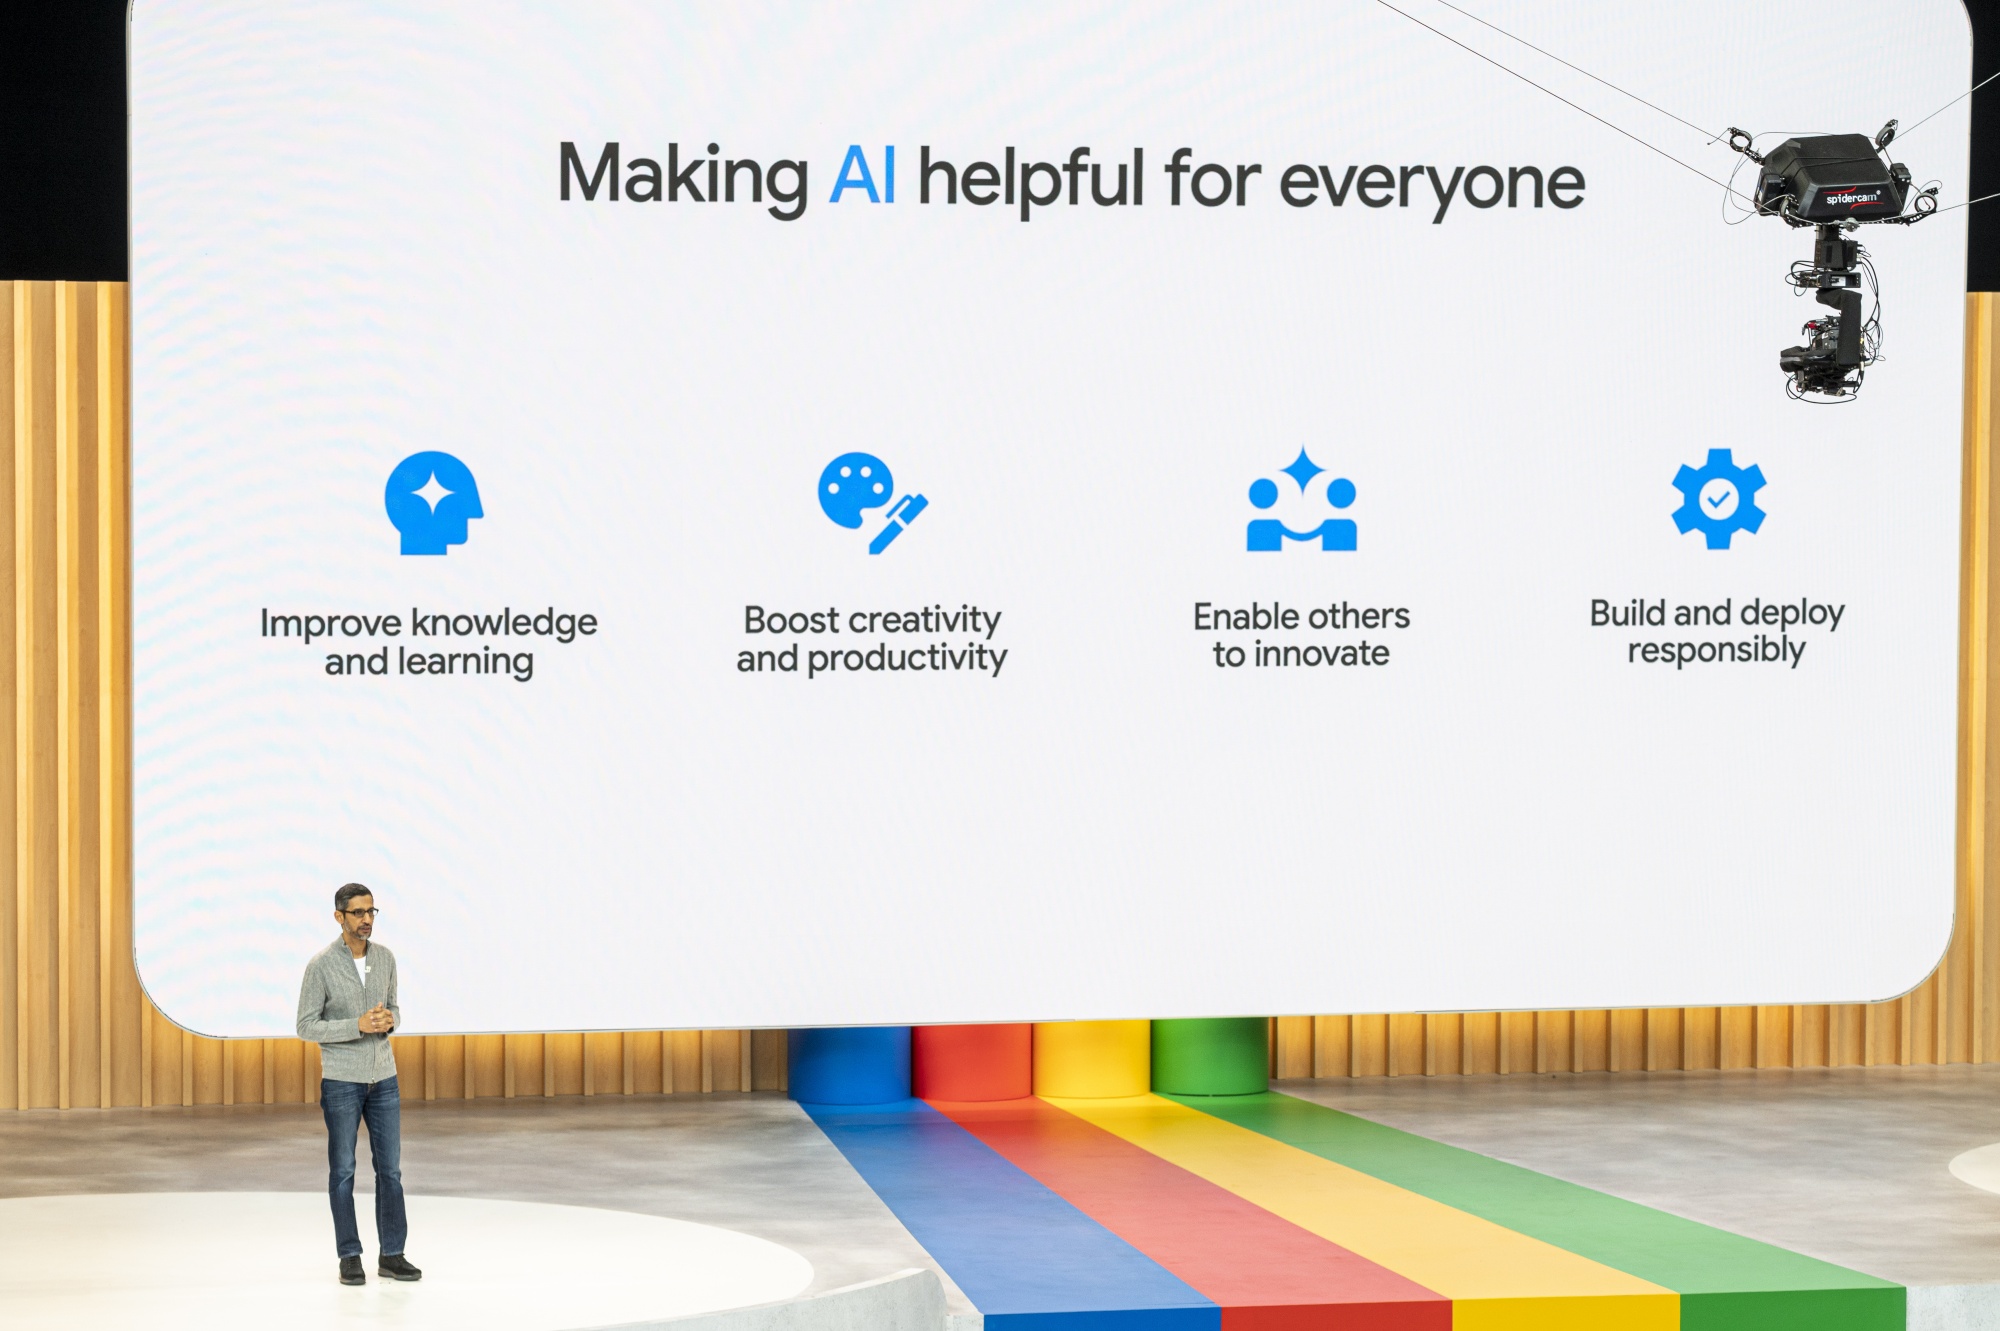 Sundar Pichai, chief executive officer of Alphabet Inc., speaking about the company’s artificial intelligence offerings at the Google I/O Developers Conference in May.